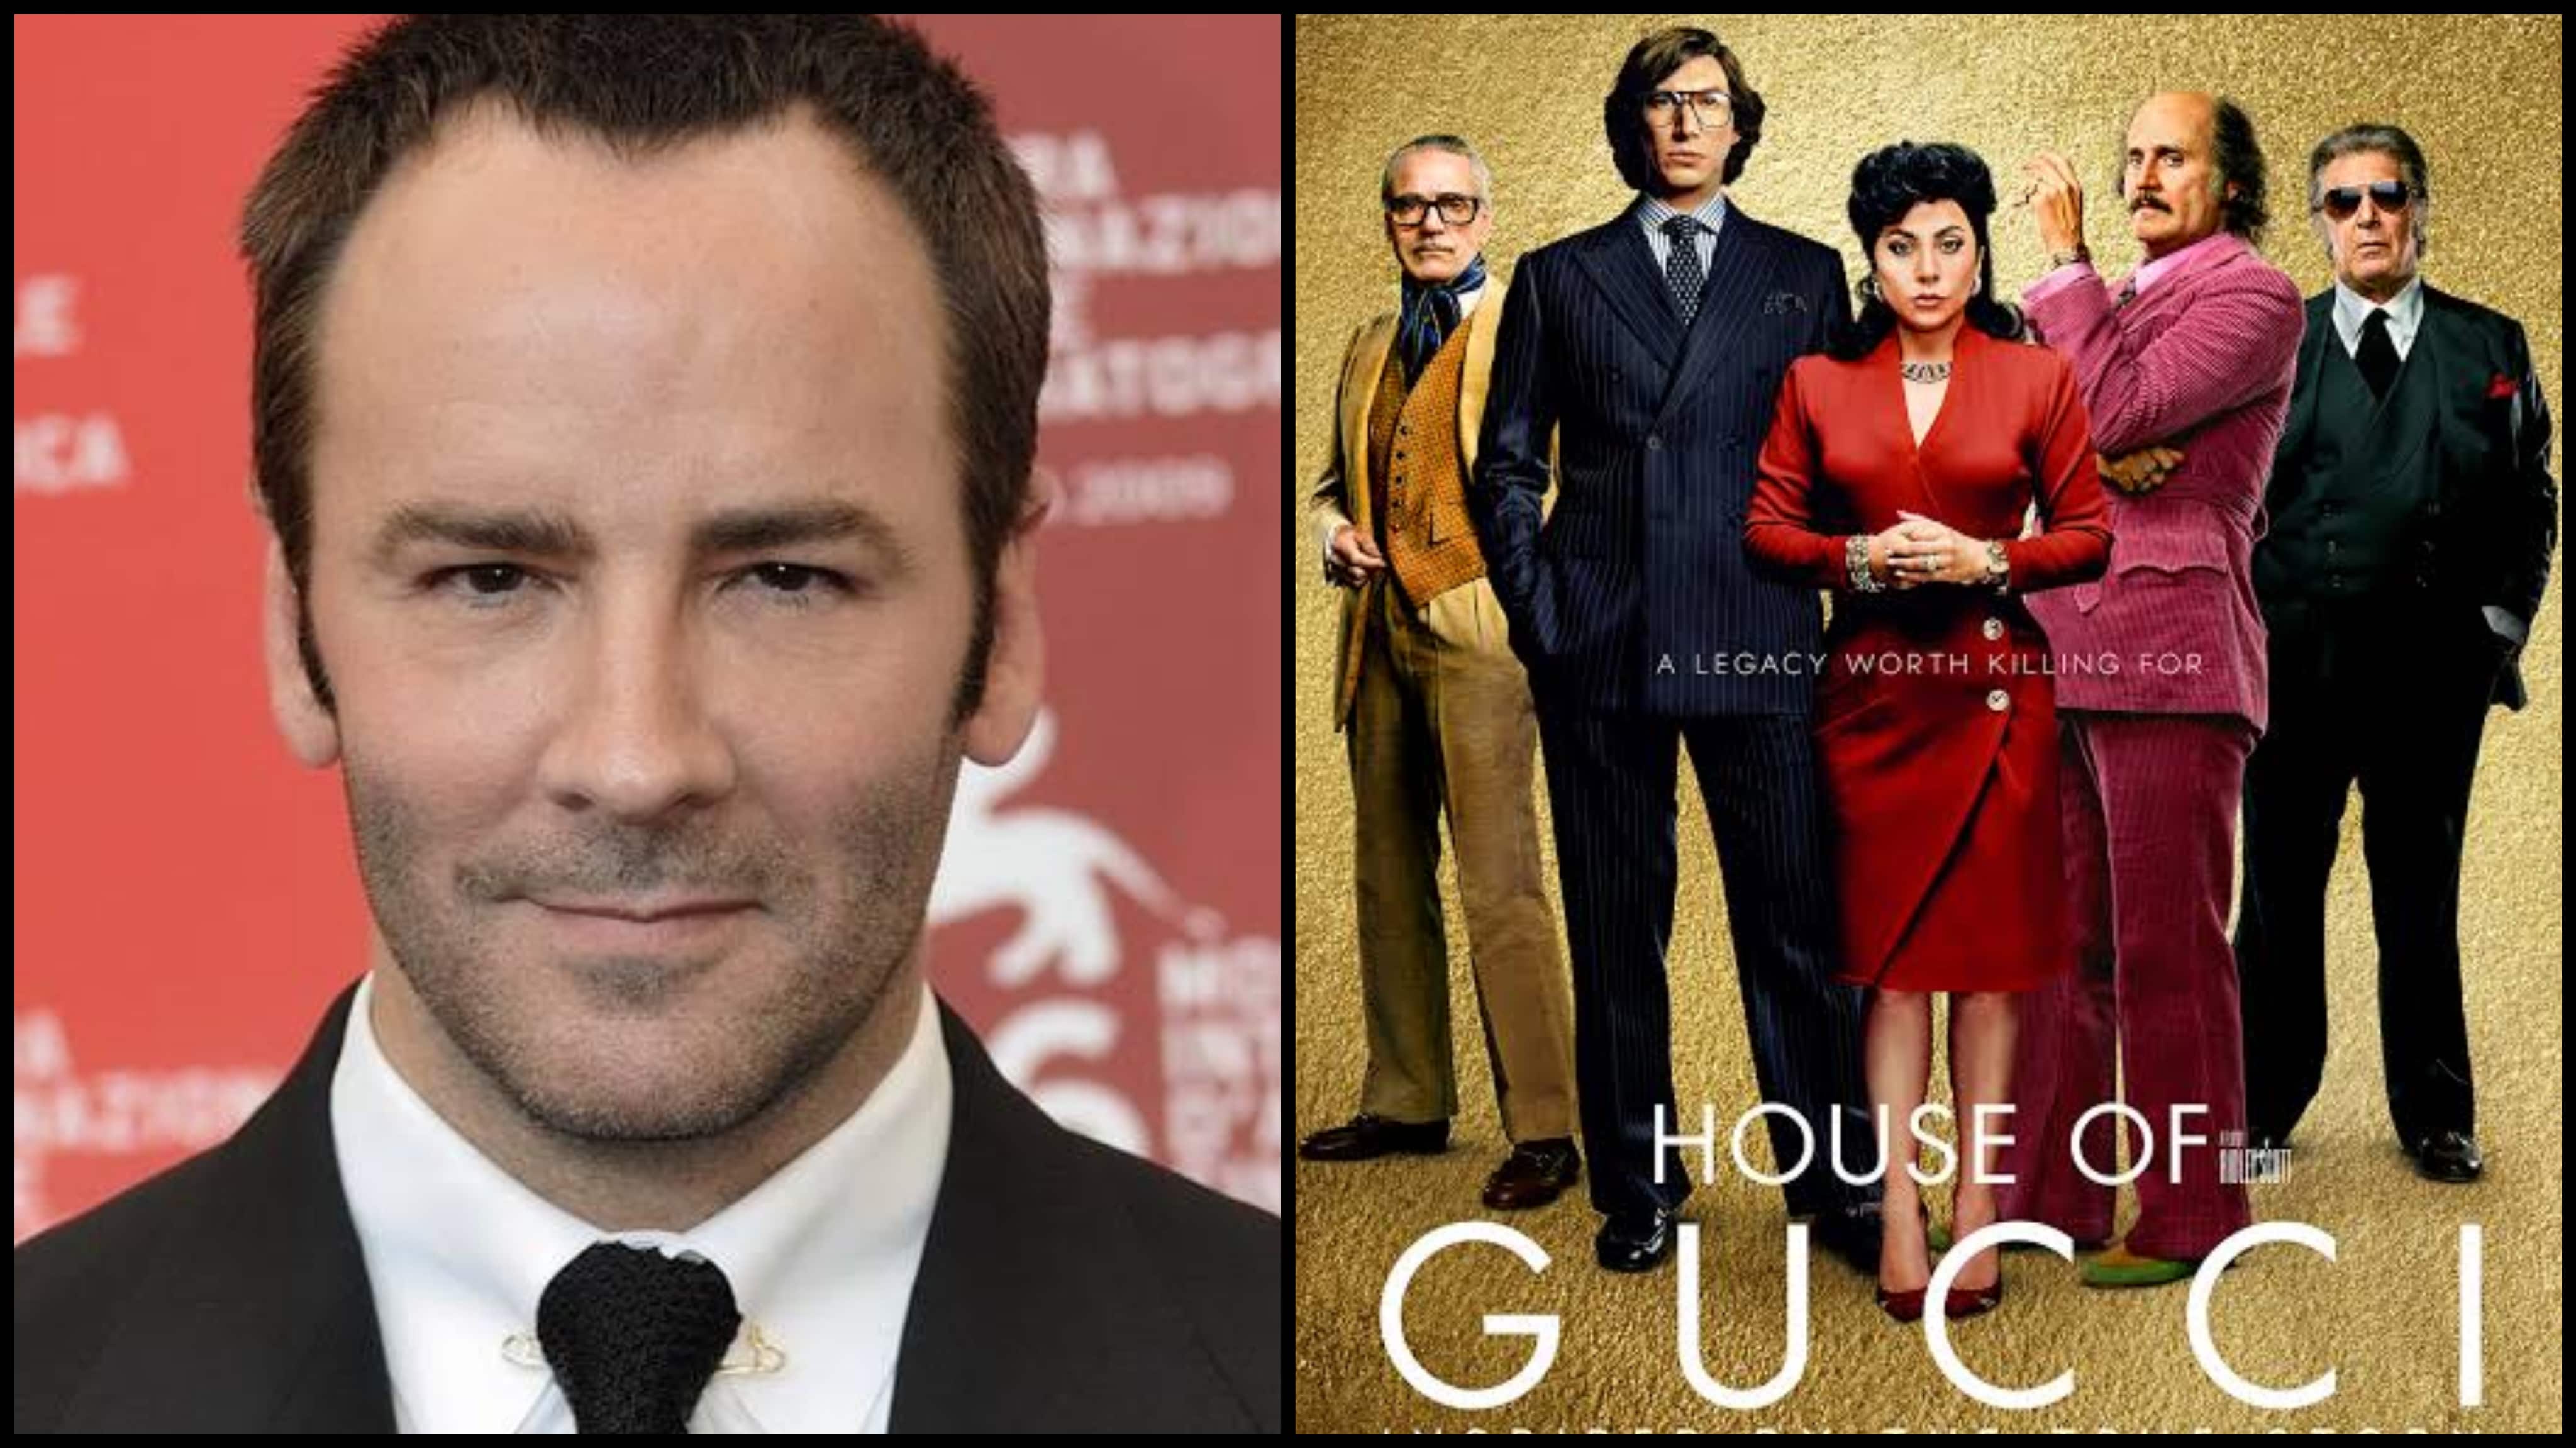 Tom Ford Shares His Review on House of Gucci Film for Air Mail, tom ford 